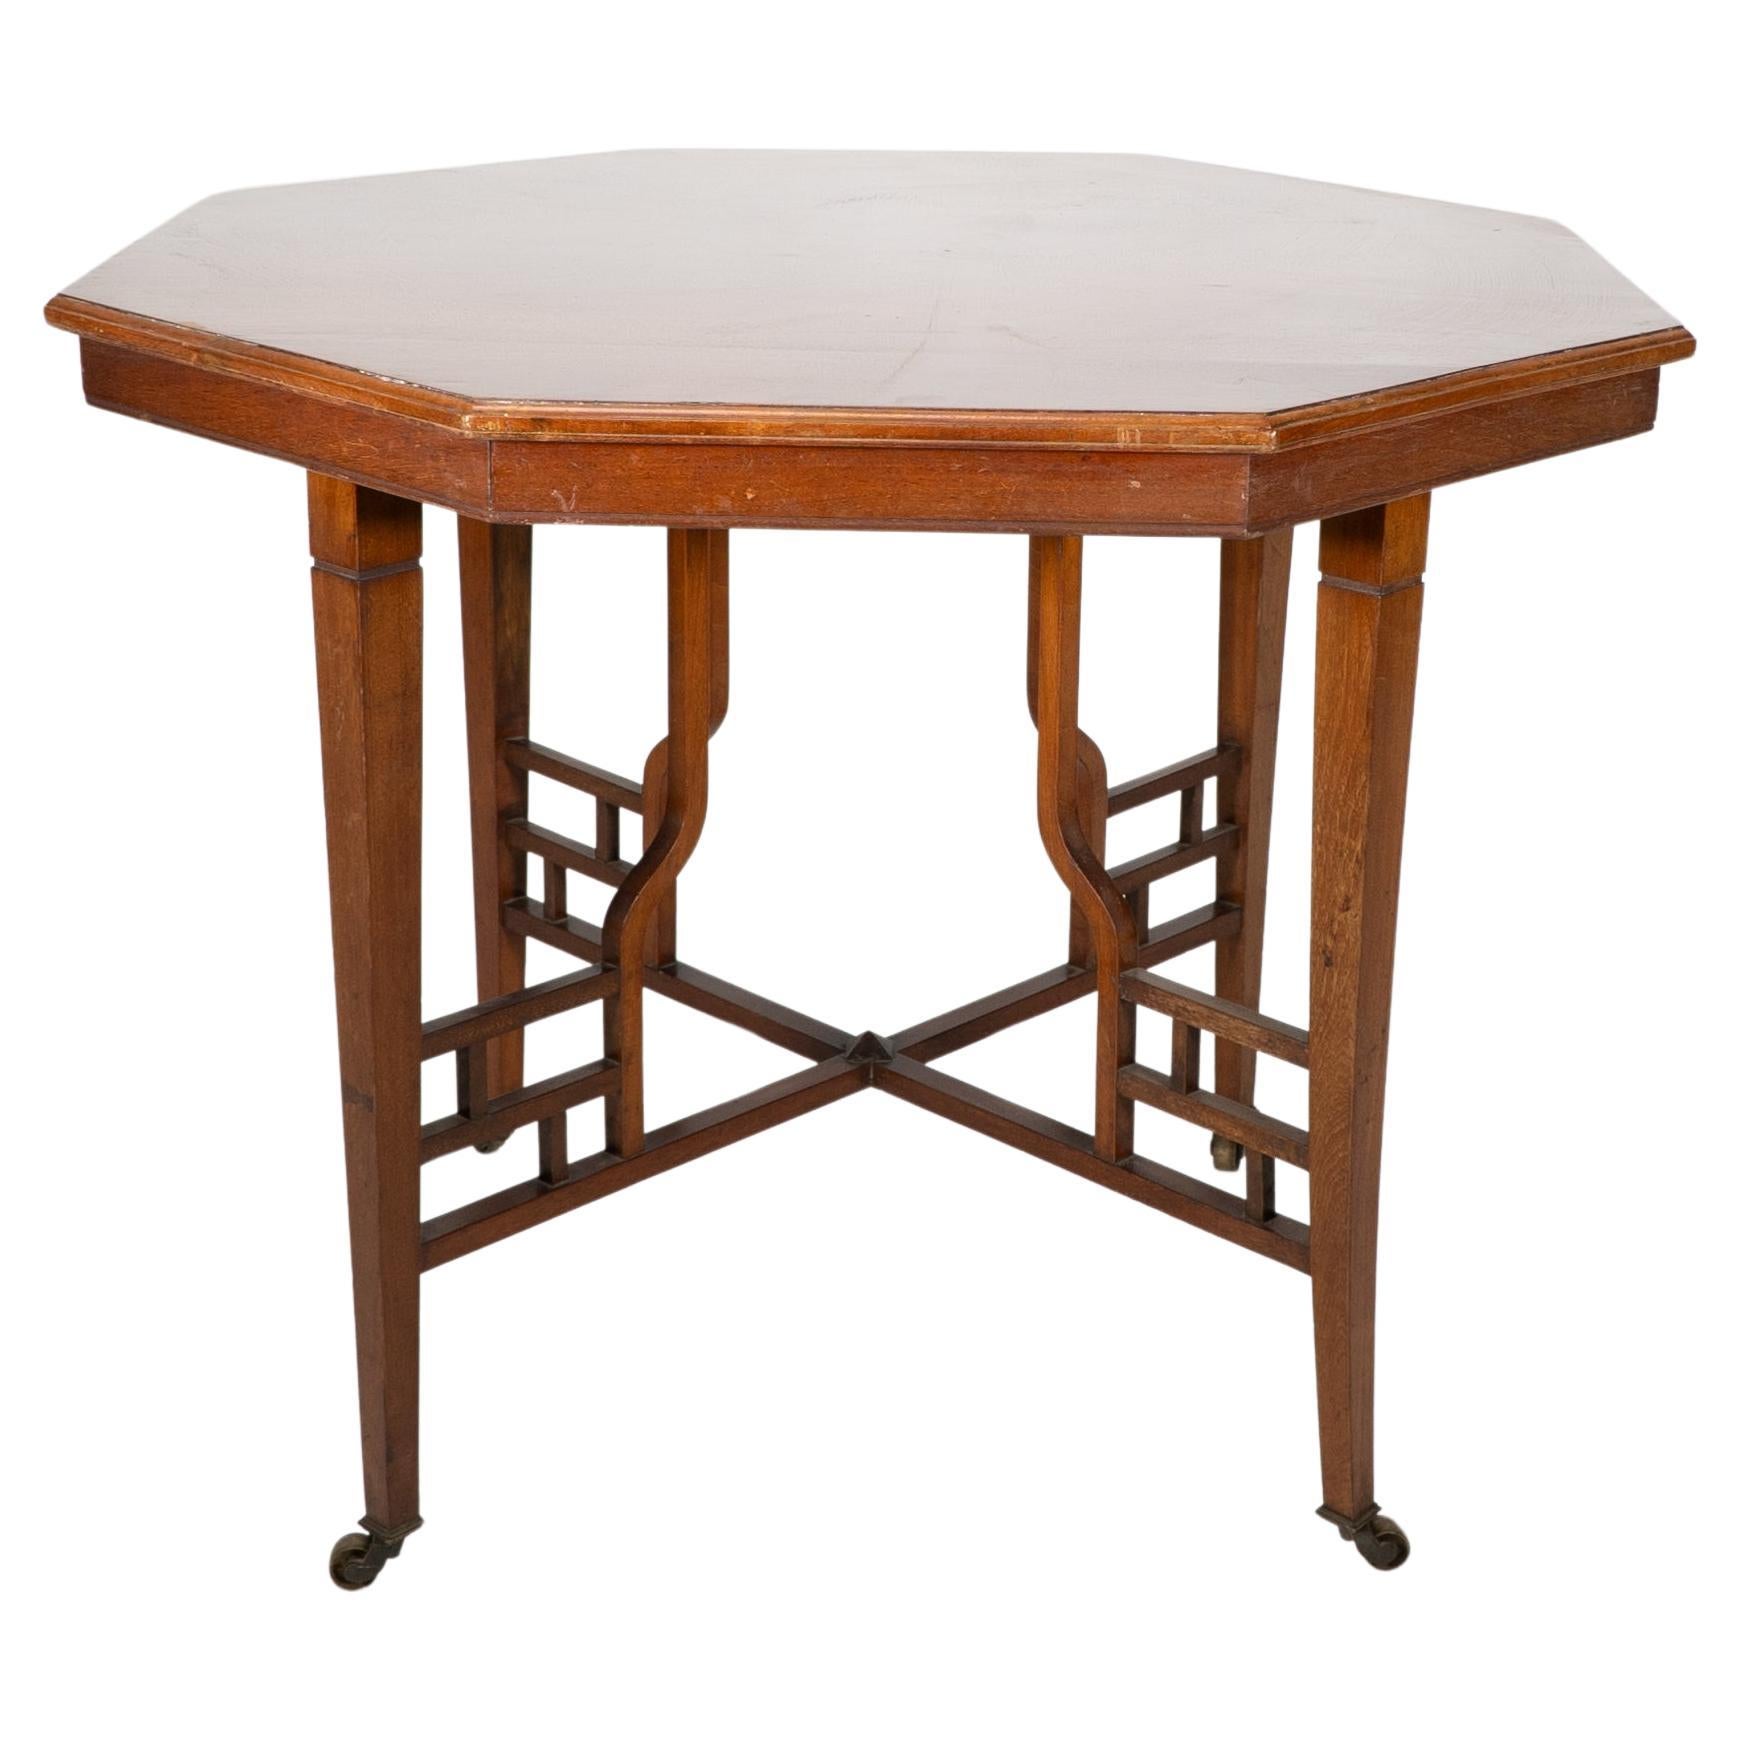 Lambs of Manchester. Anglo-Japanese mahogany octagonal centre table Godwin style